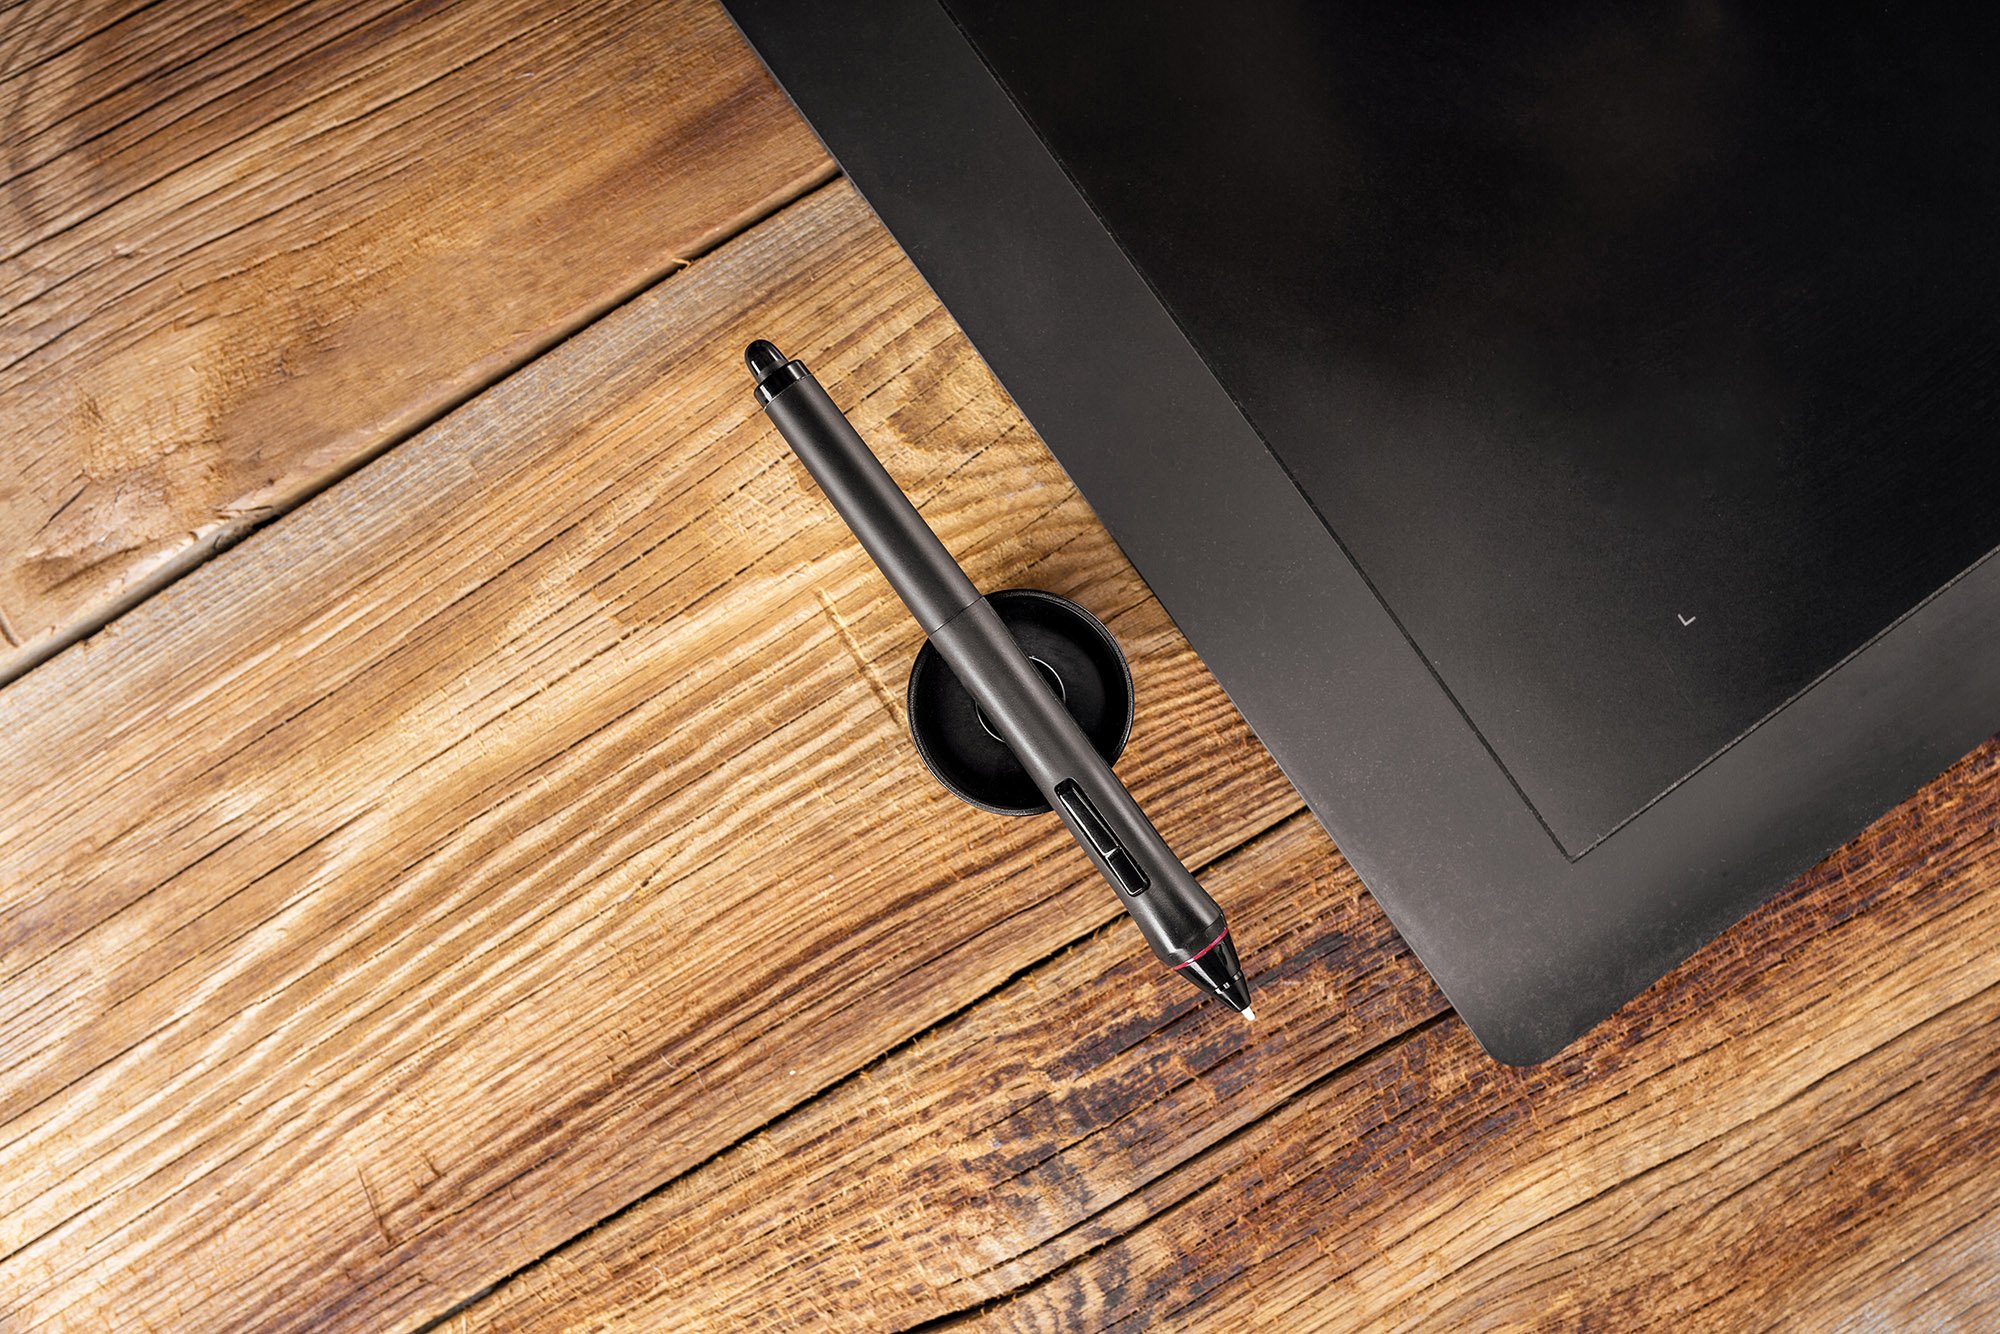  Topdown view of a tablet and stylus on a wooden table.  